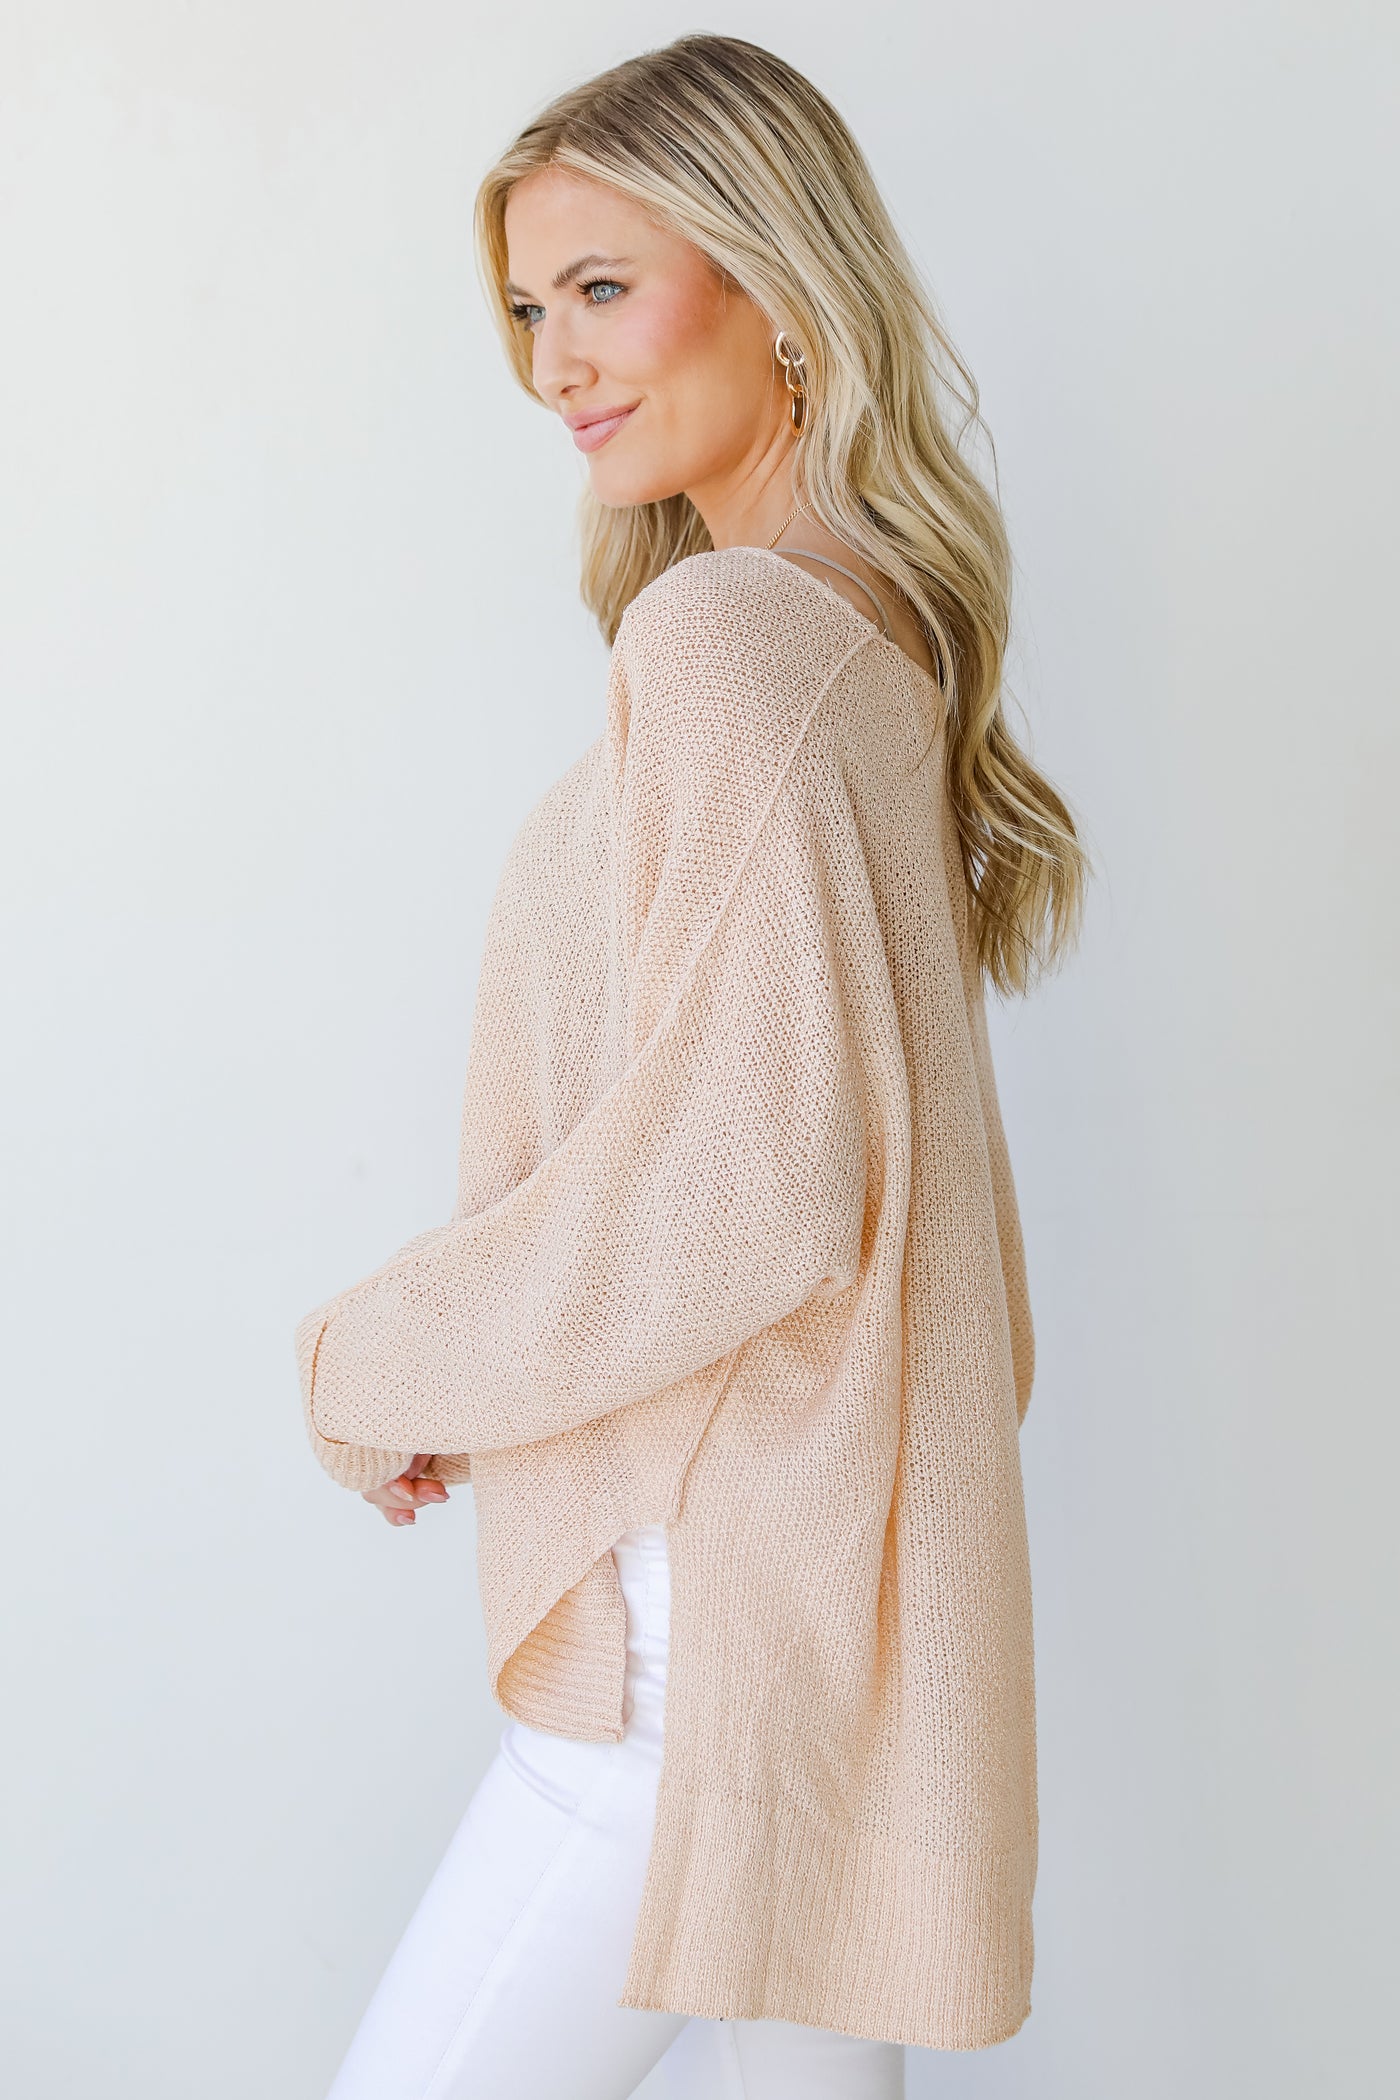 Knit Top in taupe side view